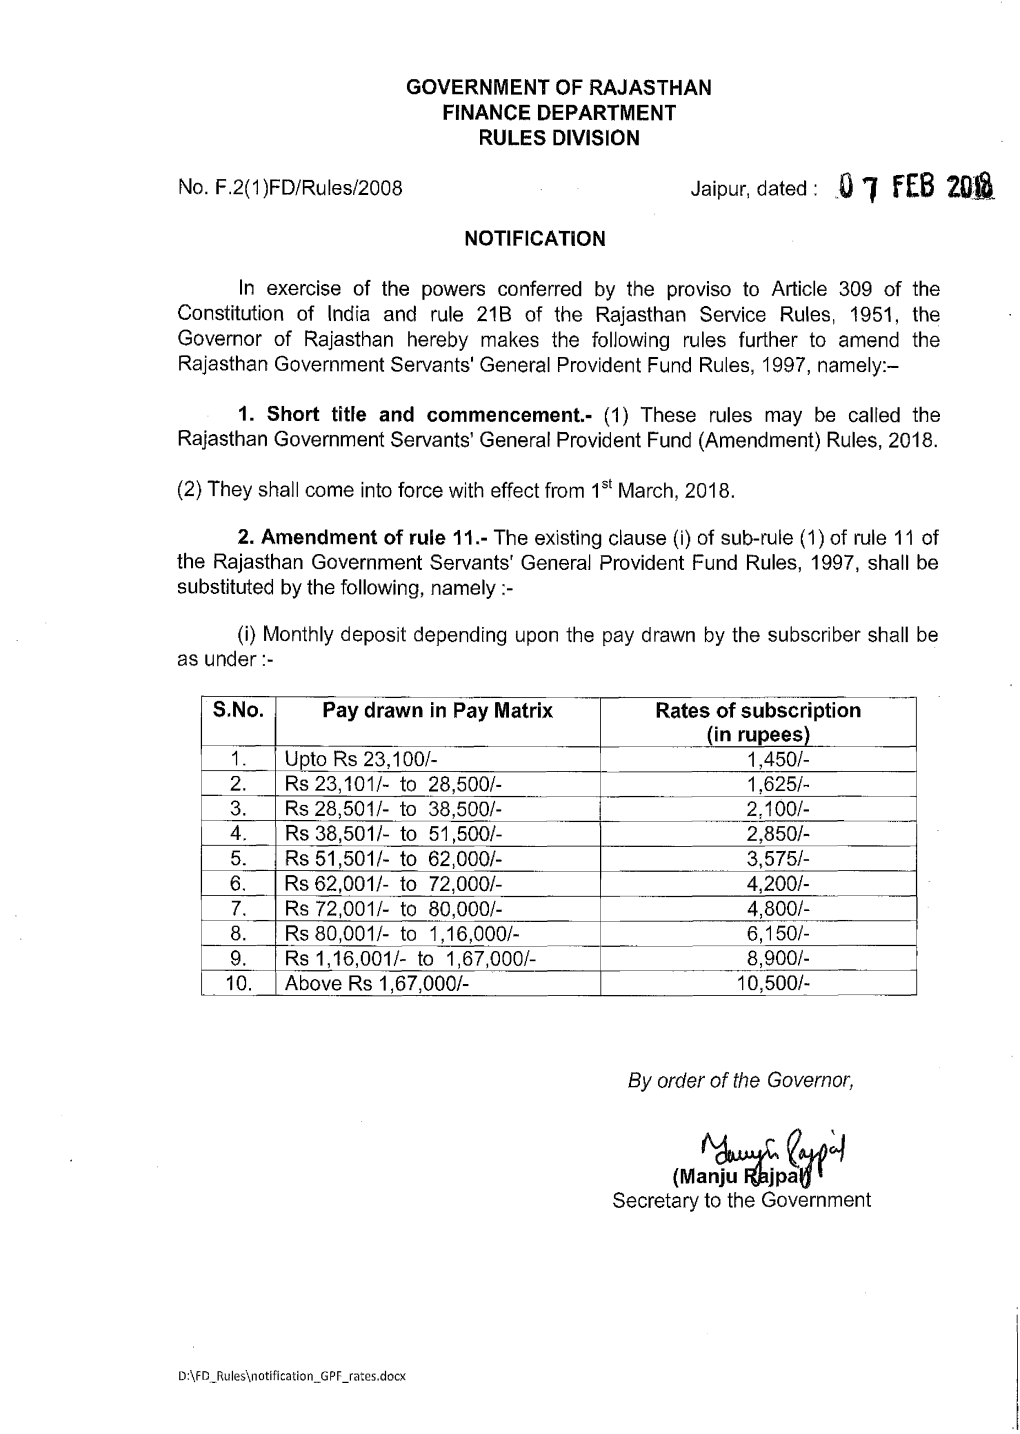 Government of Rajasthan Finance Department Rules Division